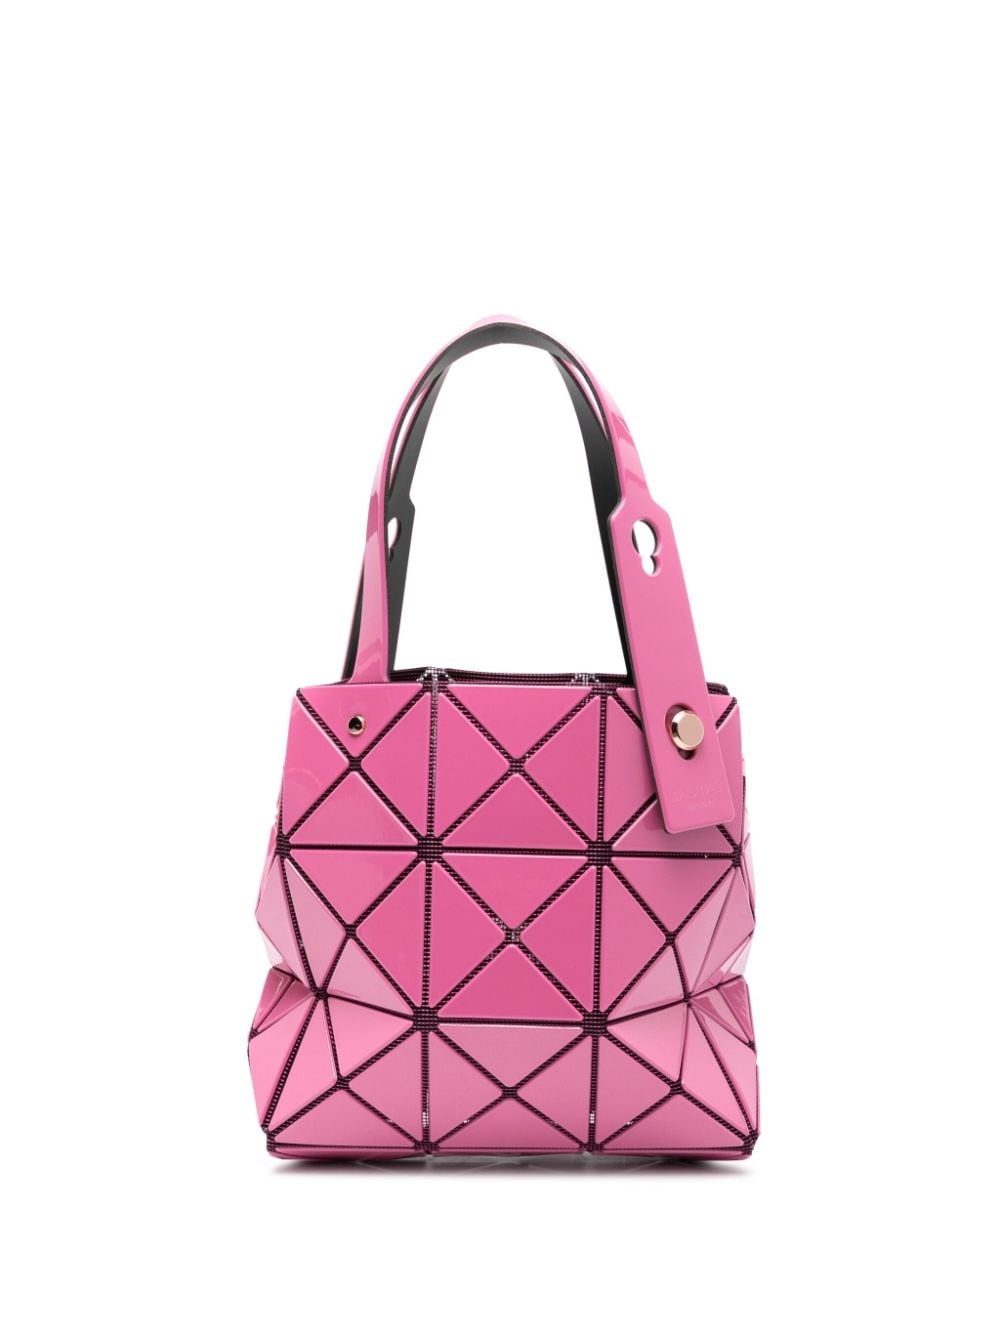 Palette Tote in White by Bao Bao Issey Miyake